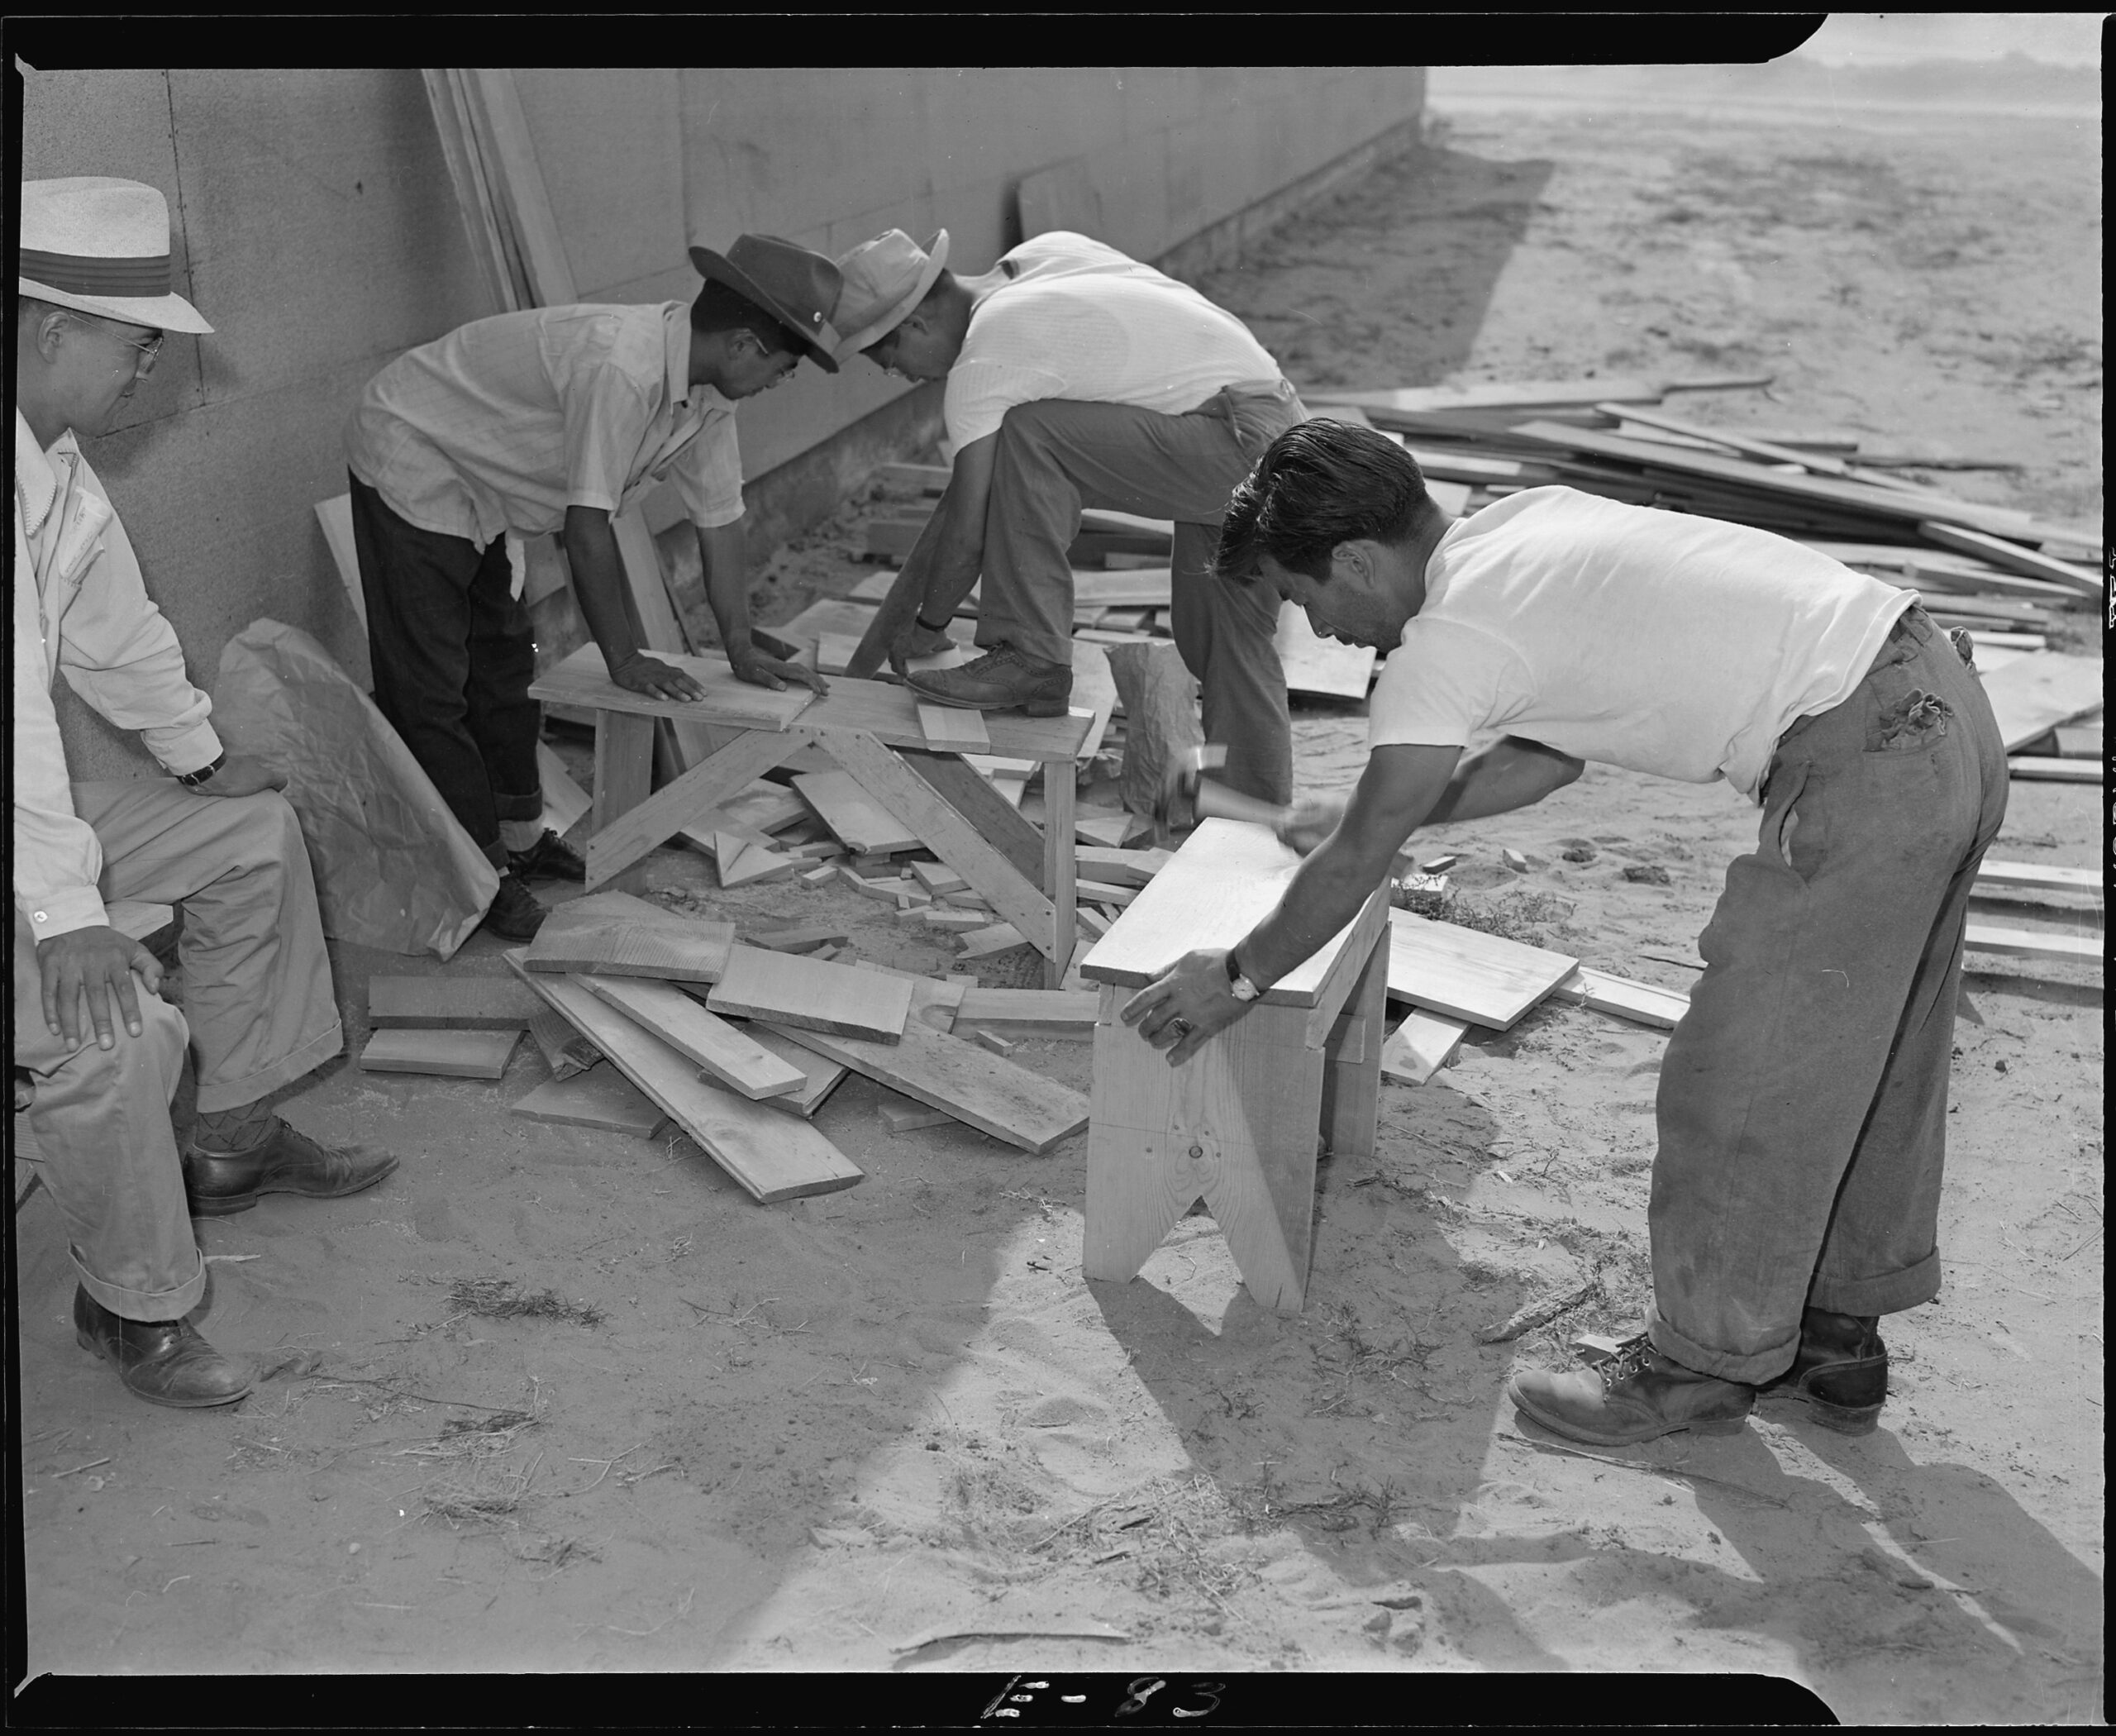 Early arrivals preparing benches and make shift seats to provide temporary furniture in their barracks. Photographer: Parker, Tom; Amache, Colorado. Courtesy of UC Berkeley, Bancroft Library